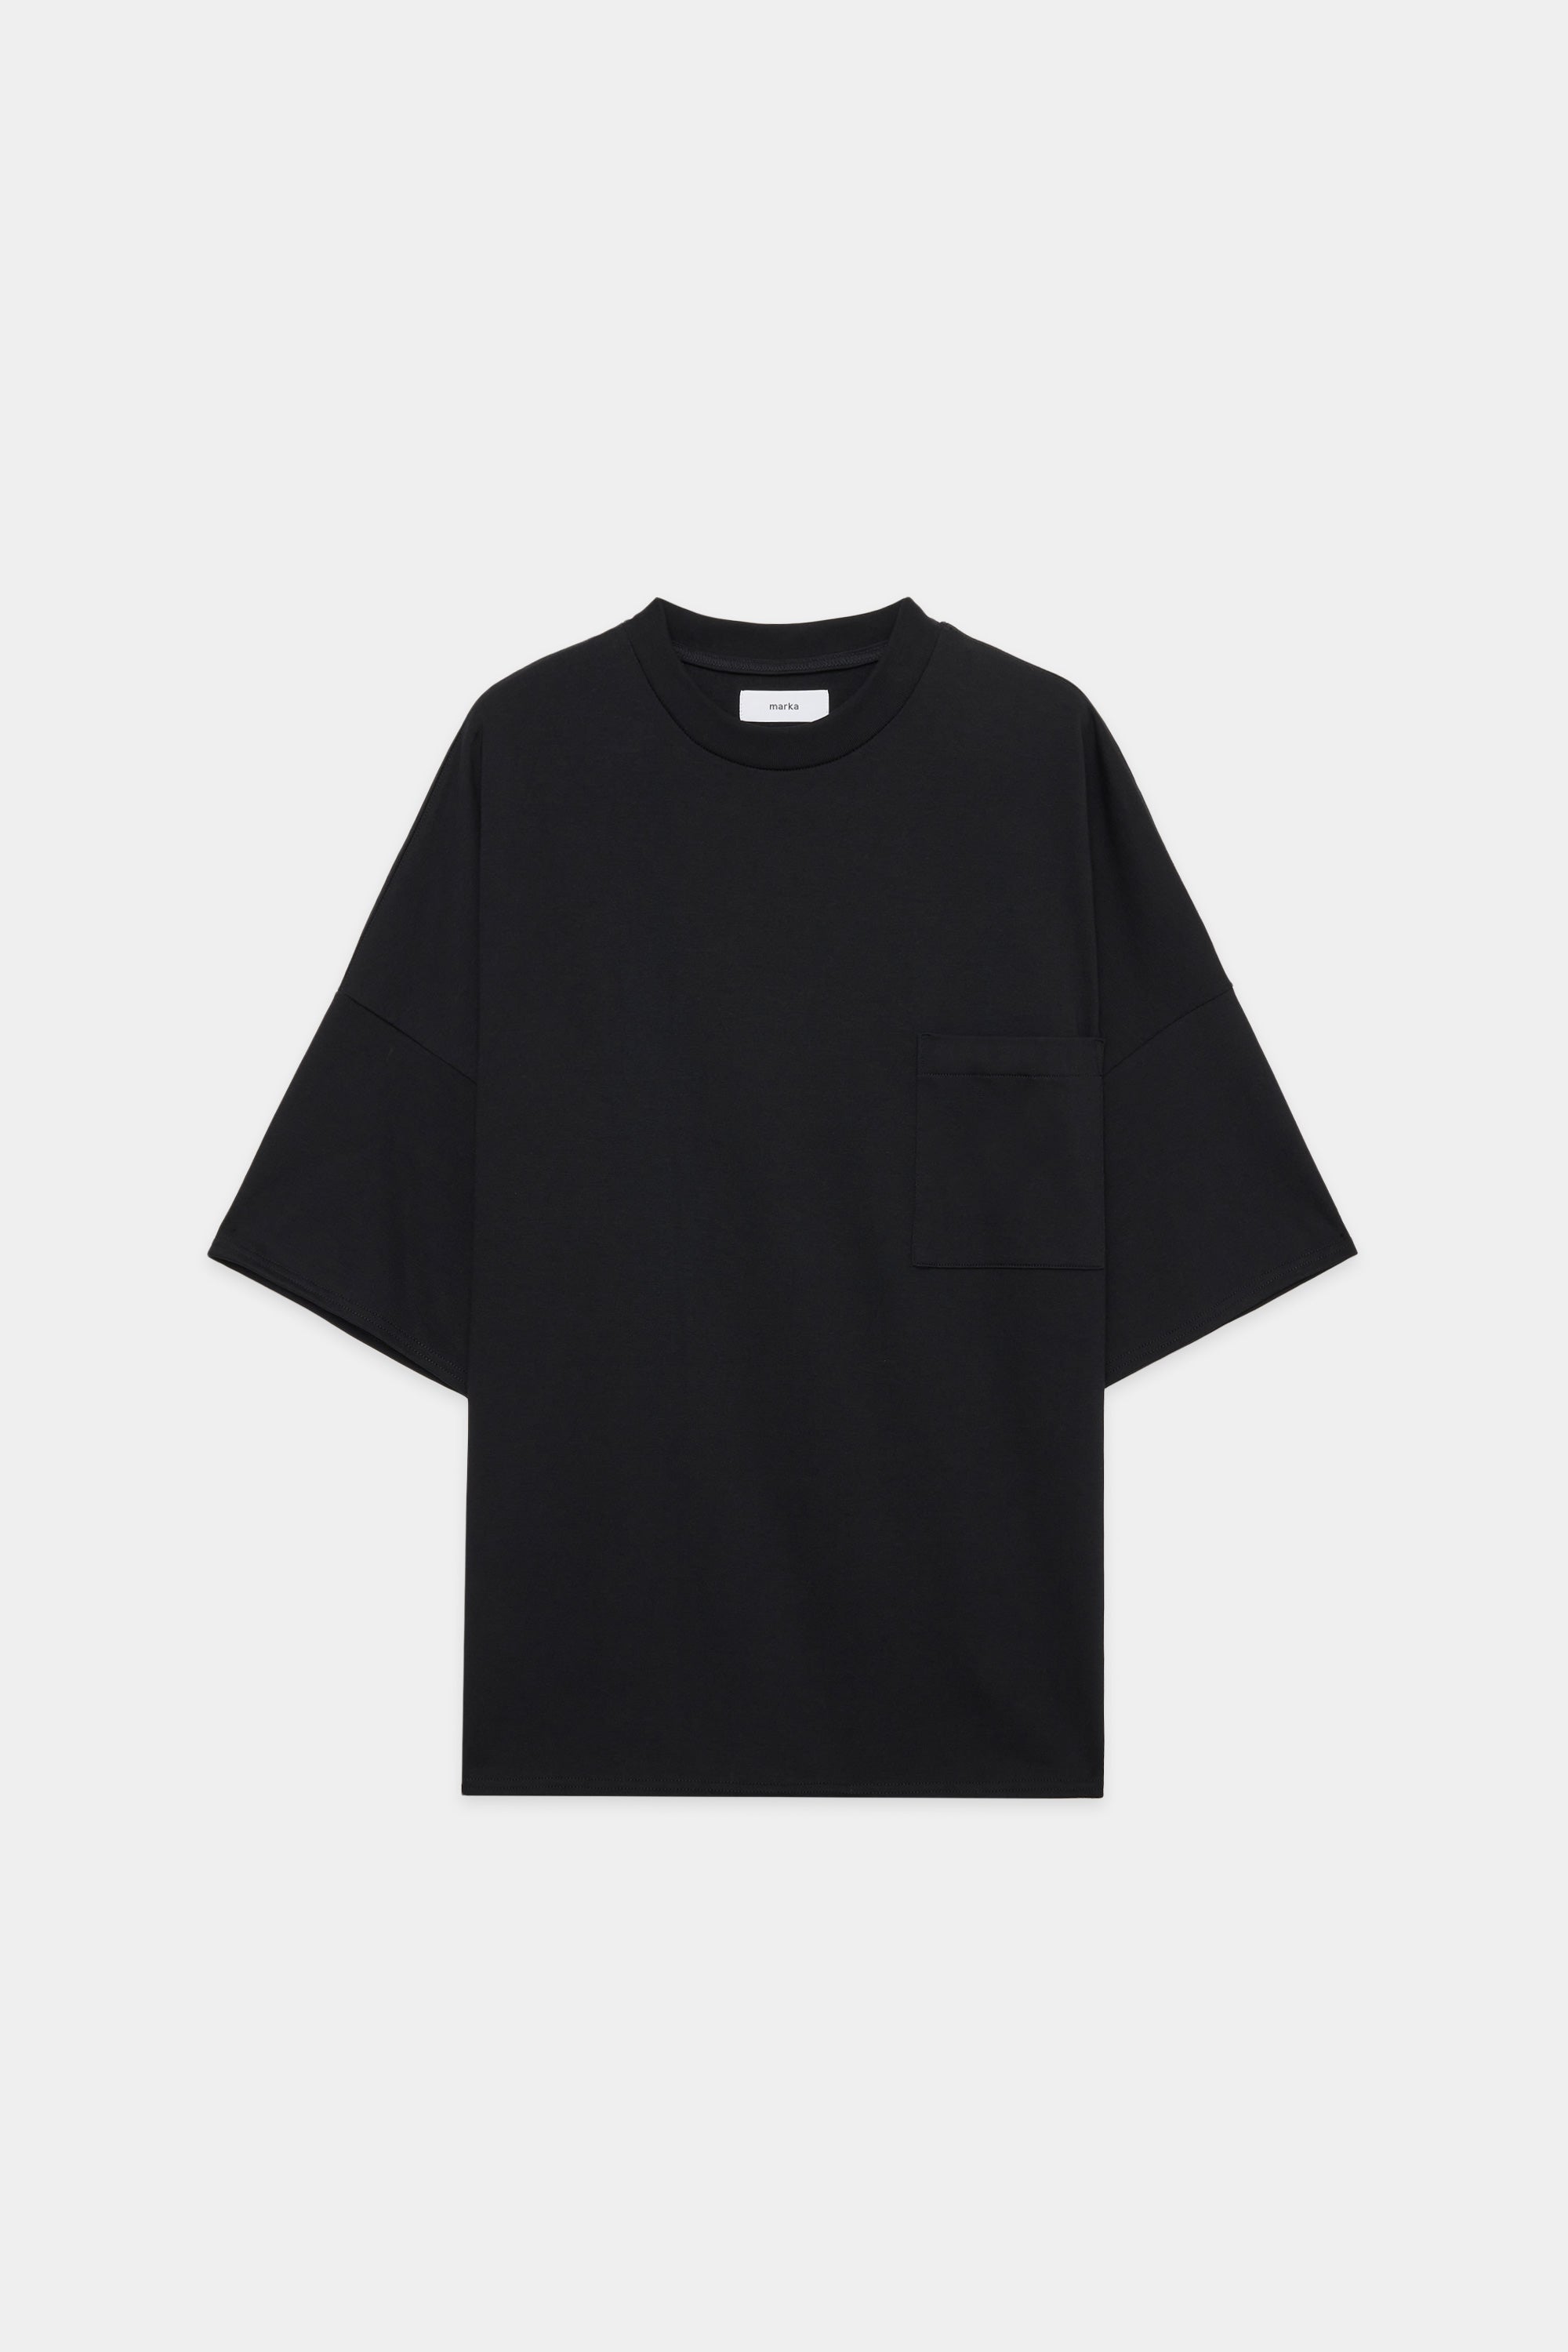 20//1 RECYCLE SUVIN ORGANIC COTTON KNIT POCKET TEE , Black